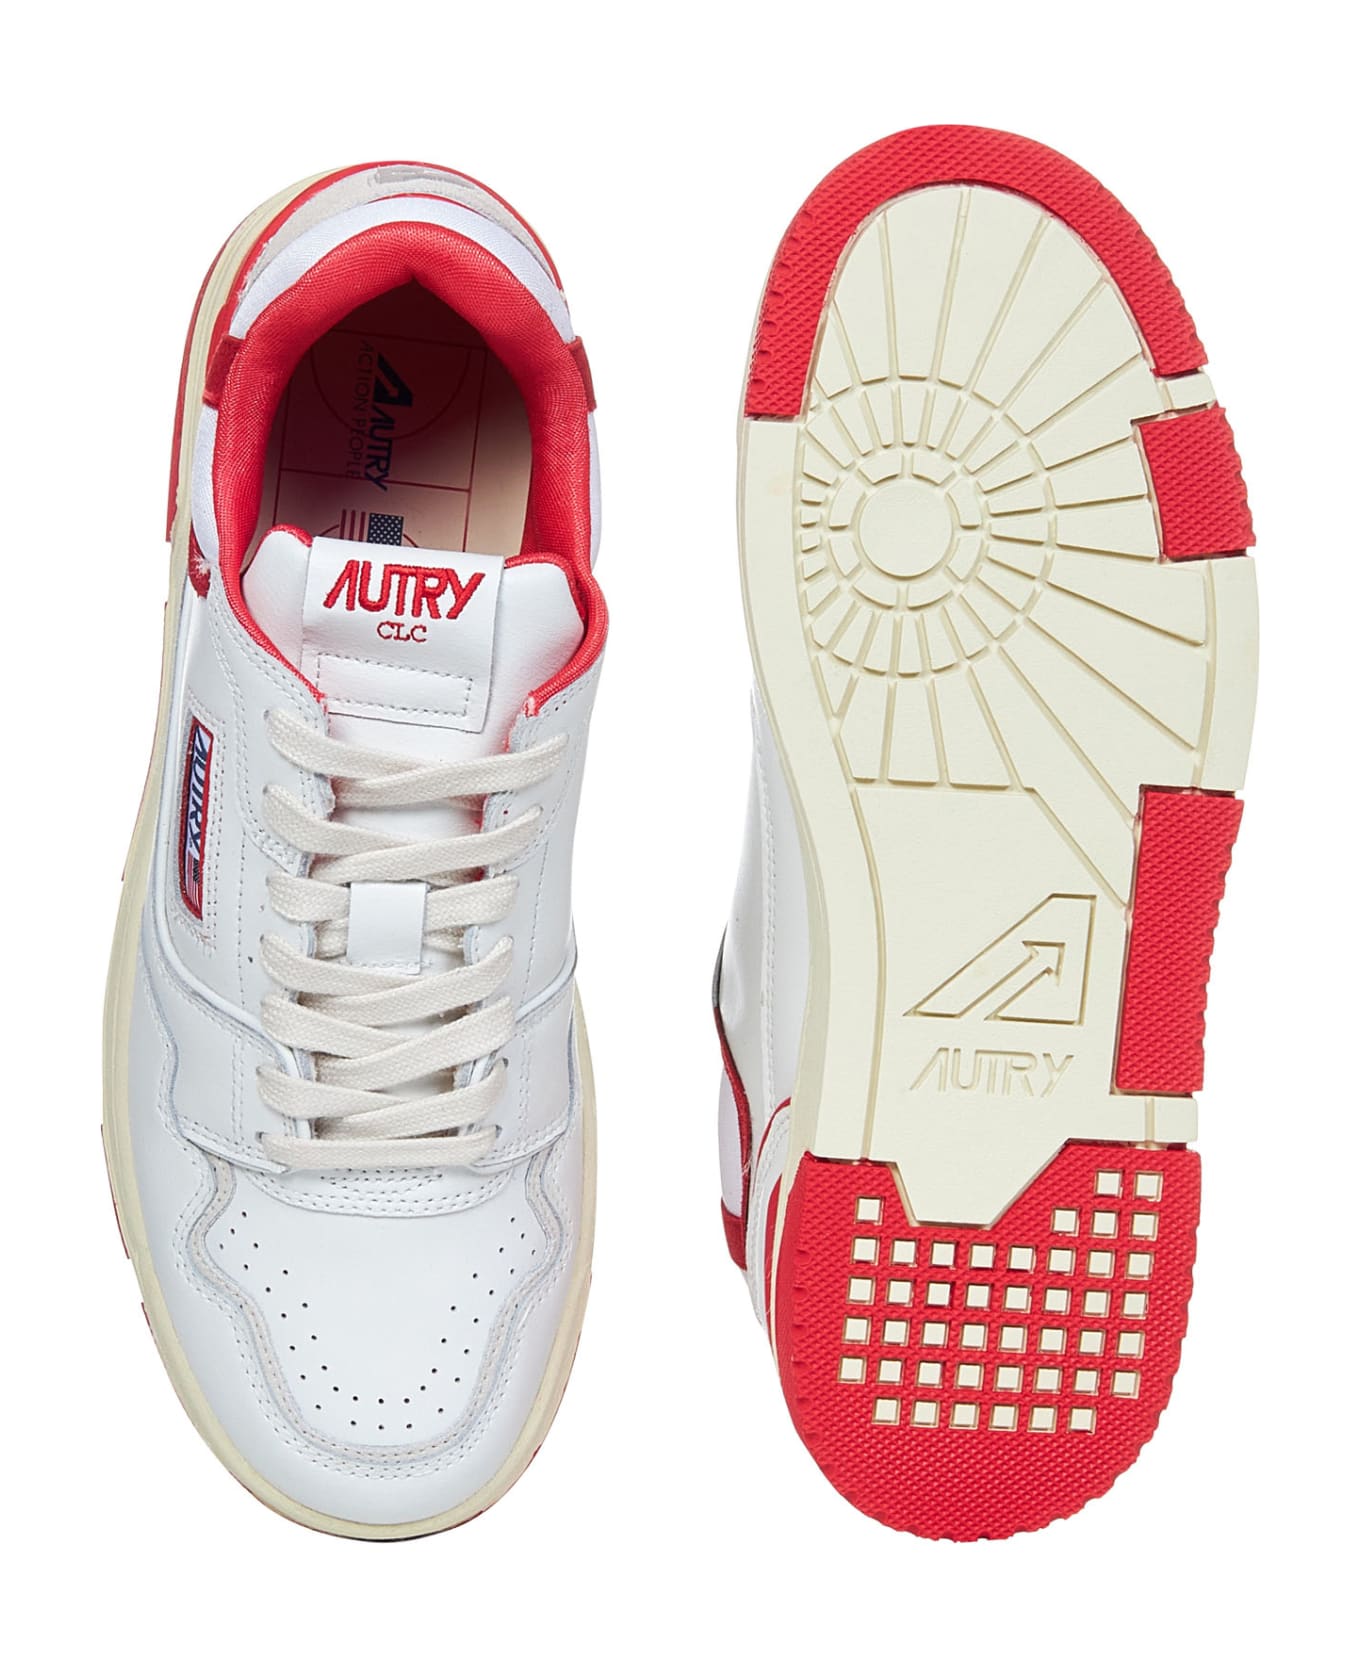 Autry Clc Sneakers - White スニーカー